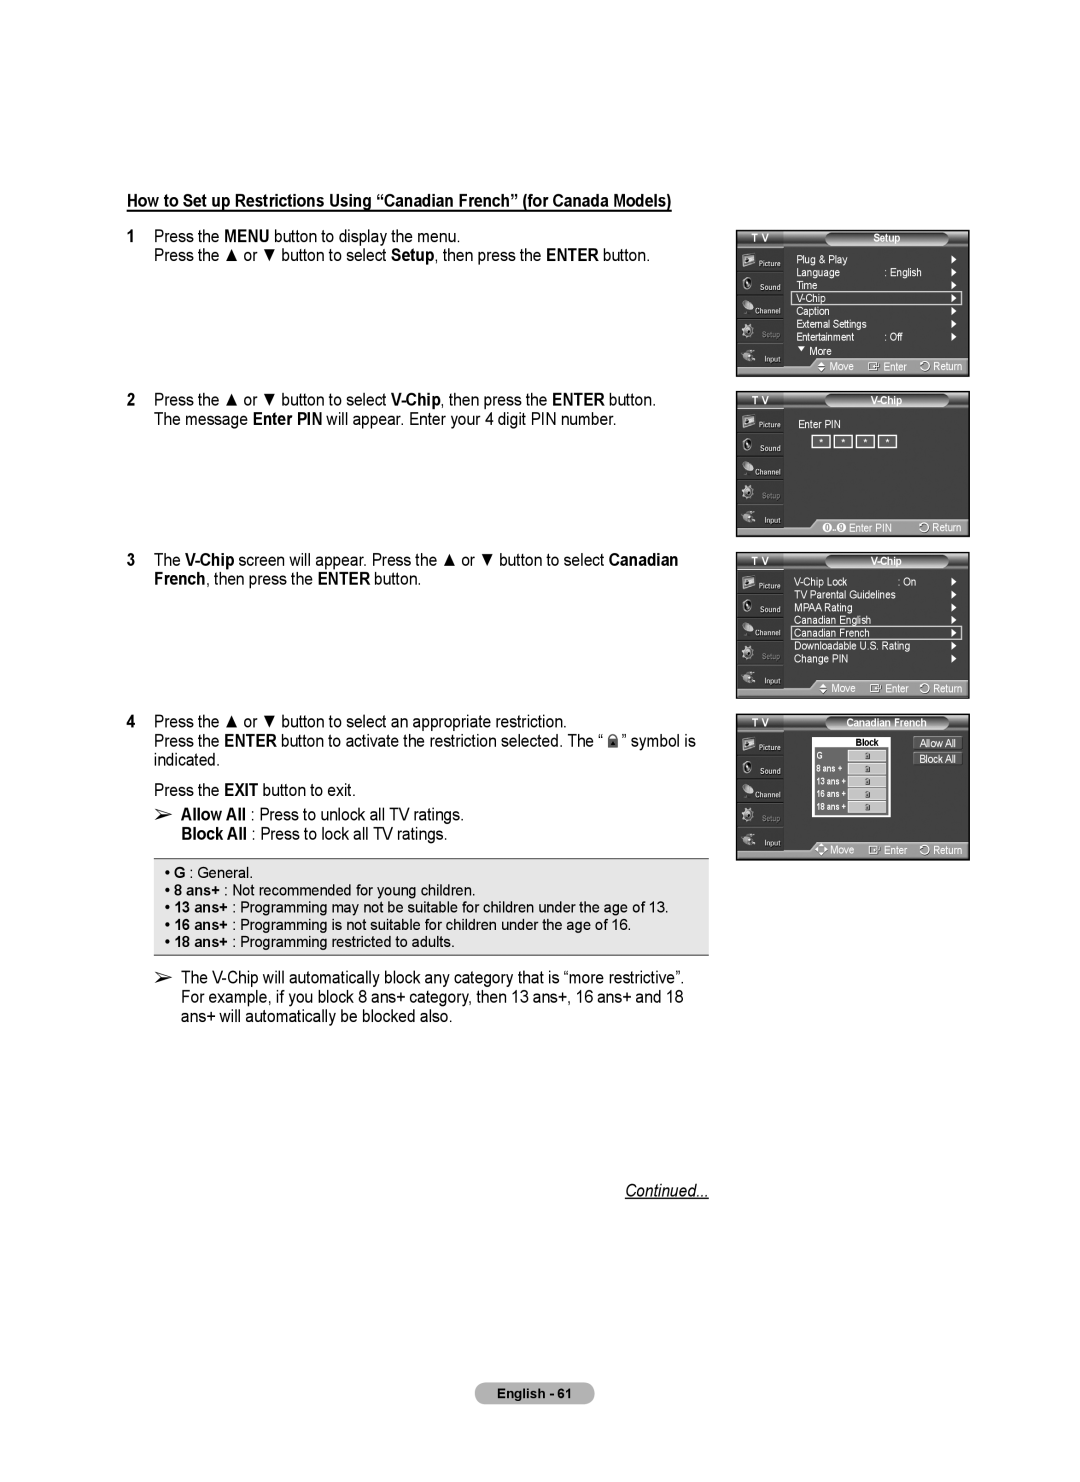 Samsung 460 user manual How to Set up Restrictions Using “Canadian French” for Canada Models, Continued 